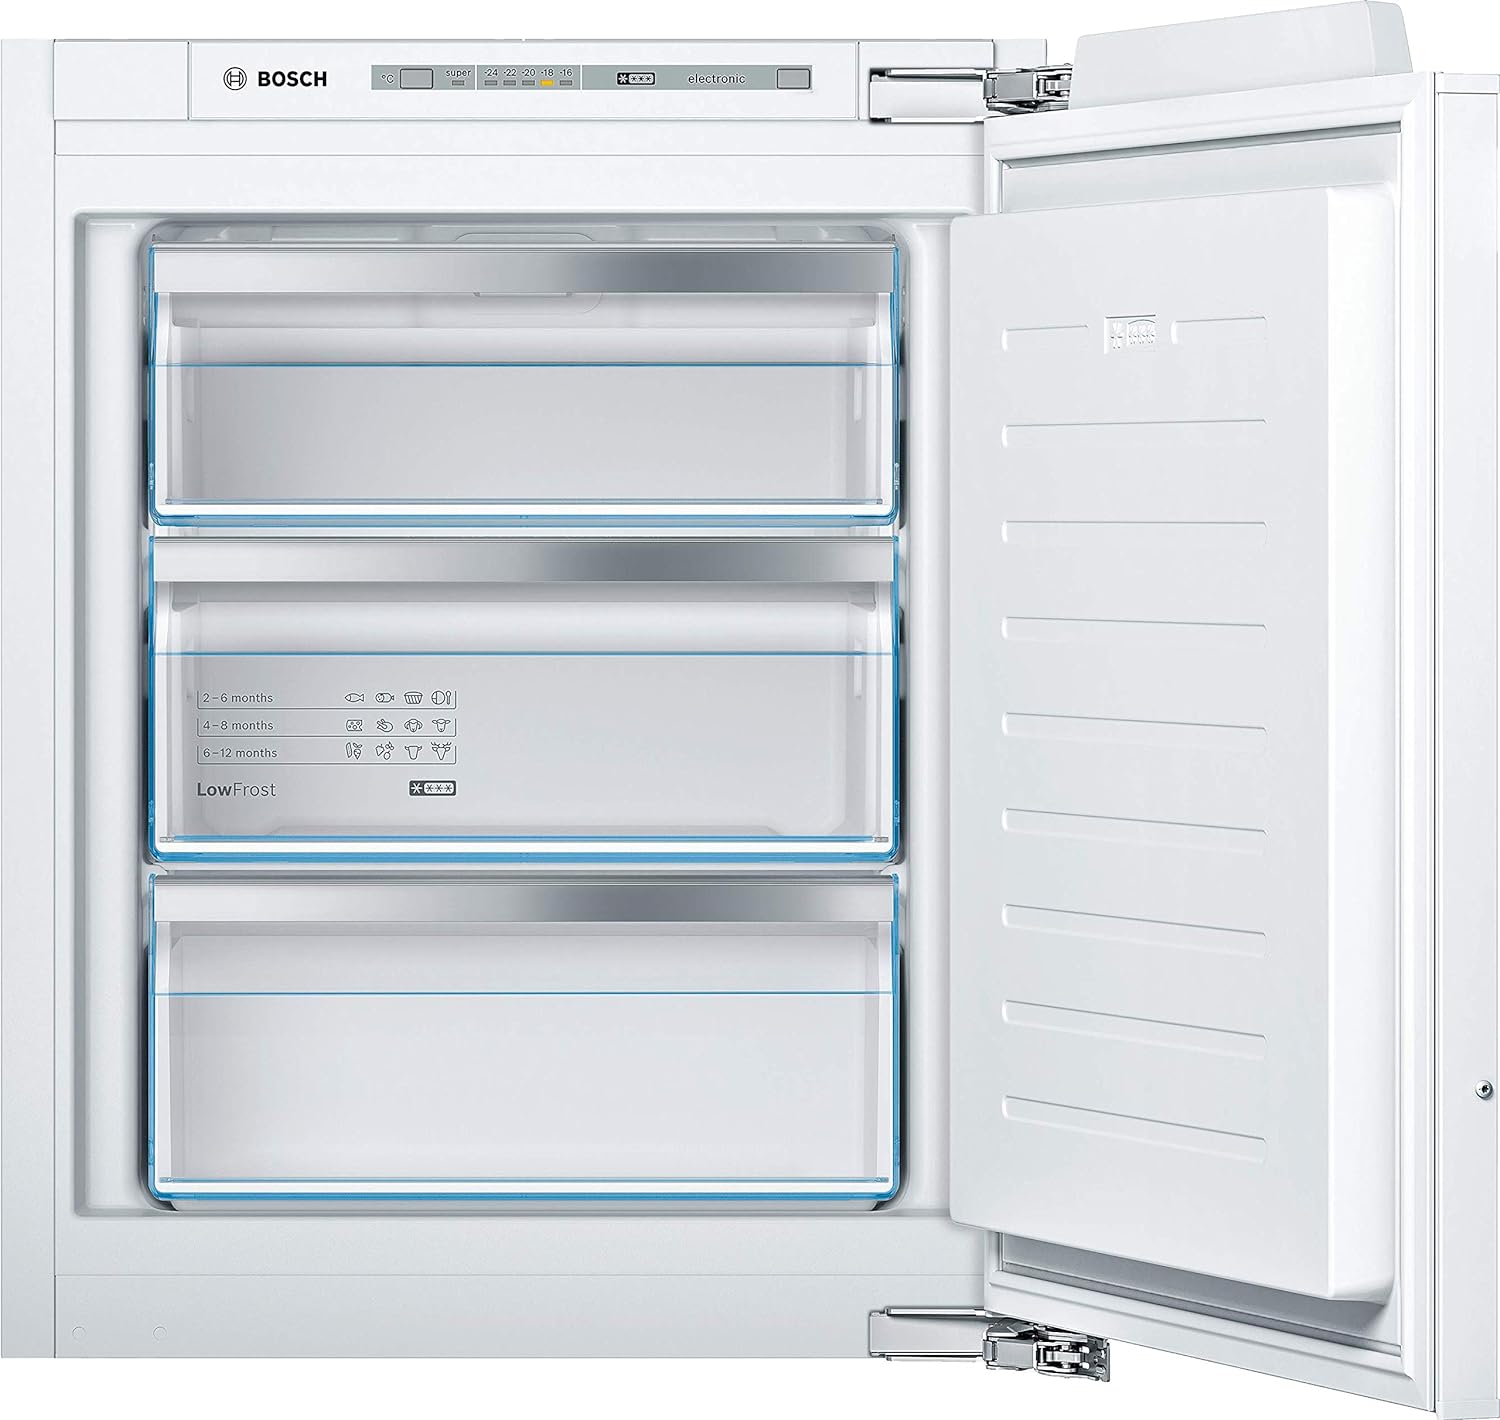 Bosch Built-In Freezer GIV11ADC0